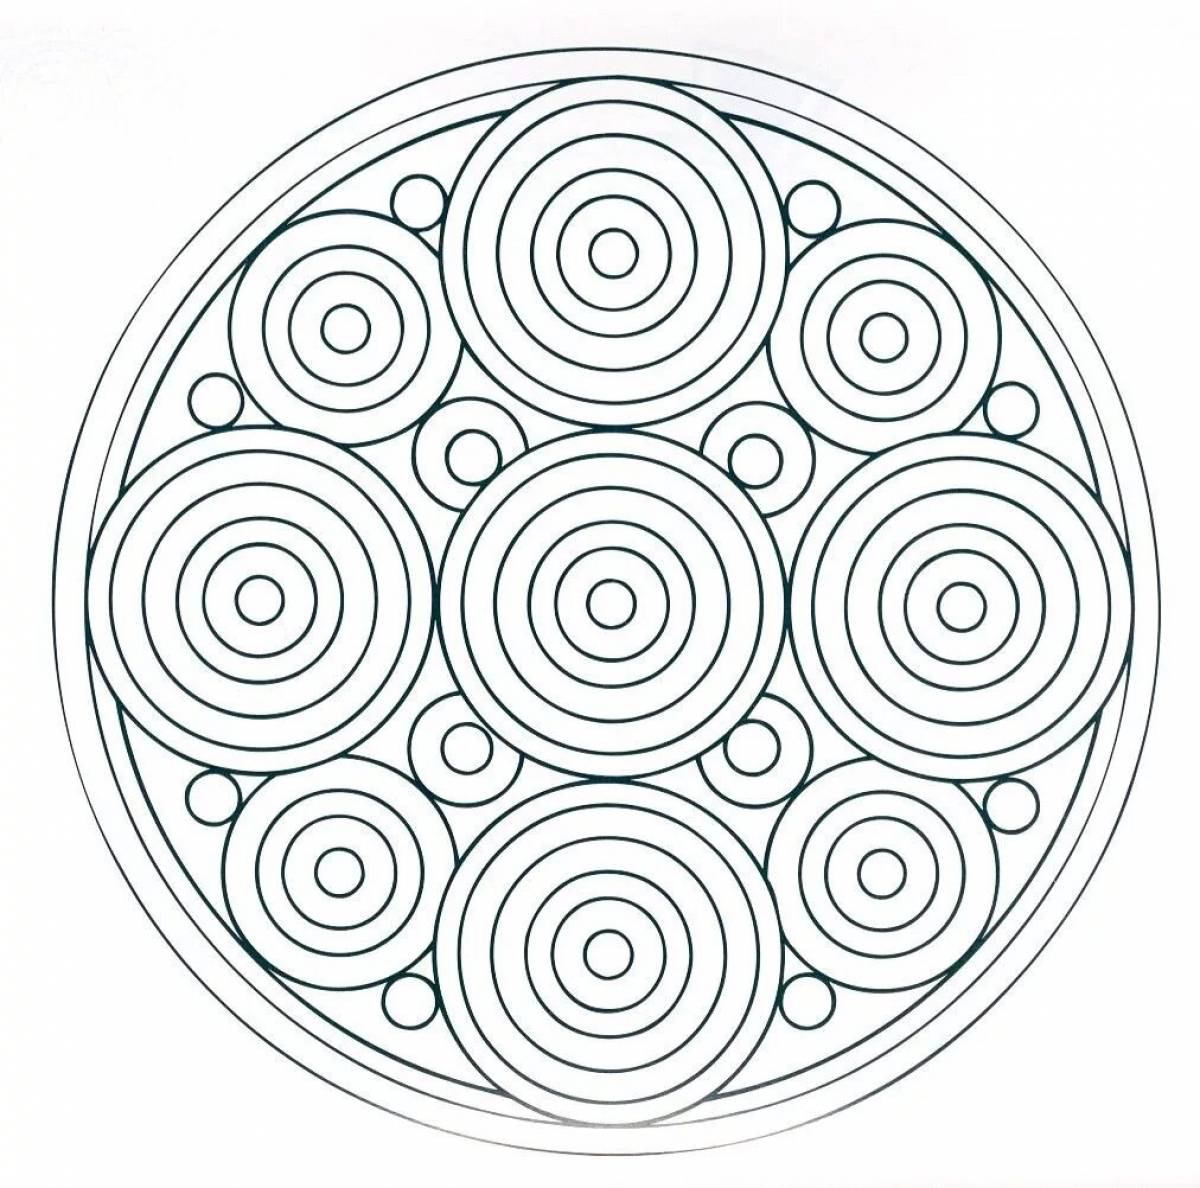 Fancy circle coloring page